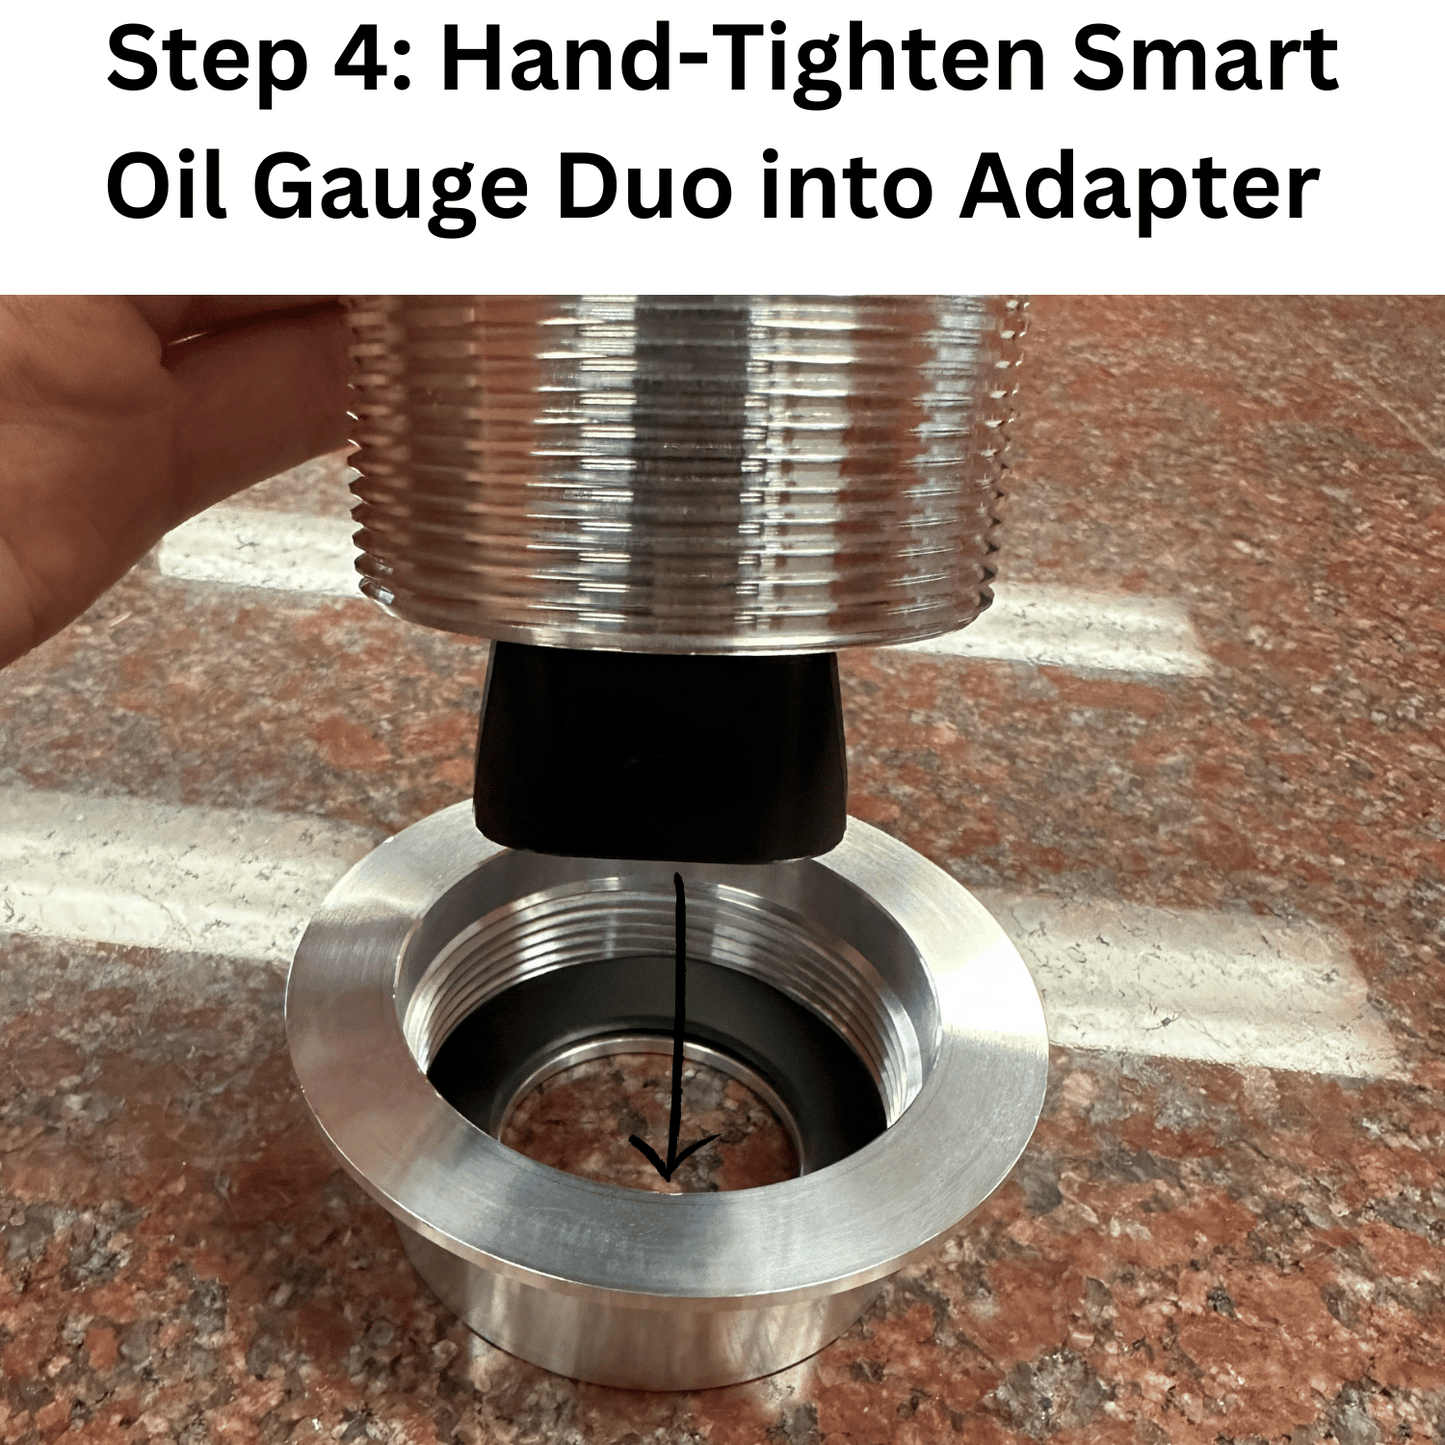 DUO – Adapter for Double Wall Tanks